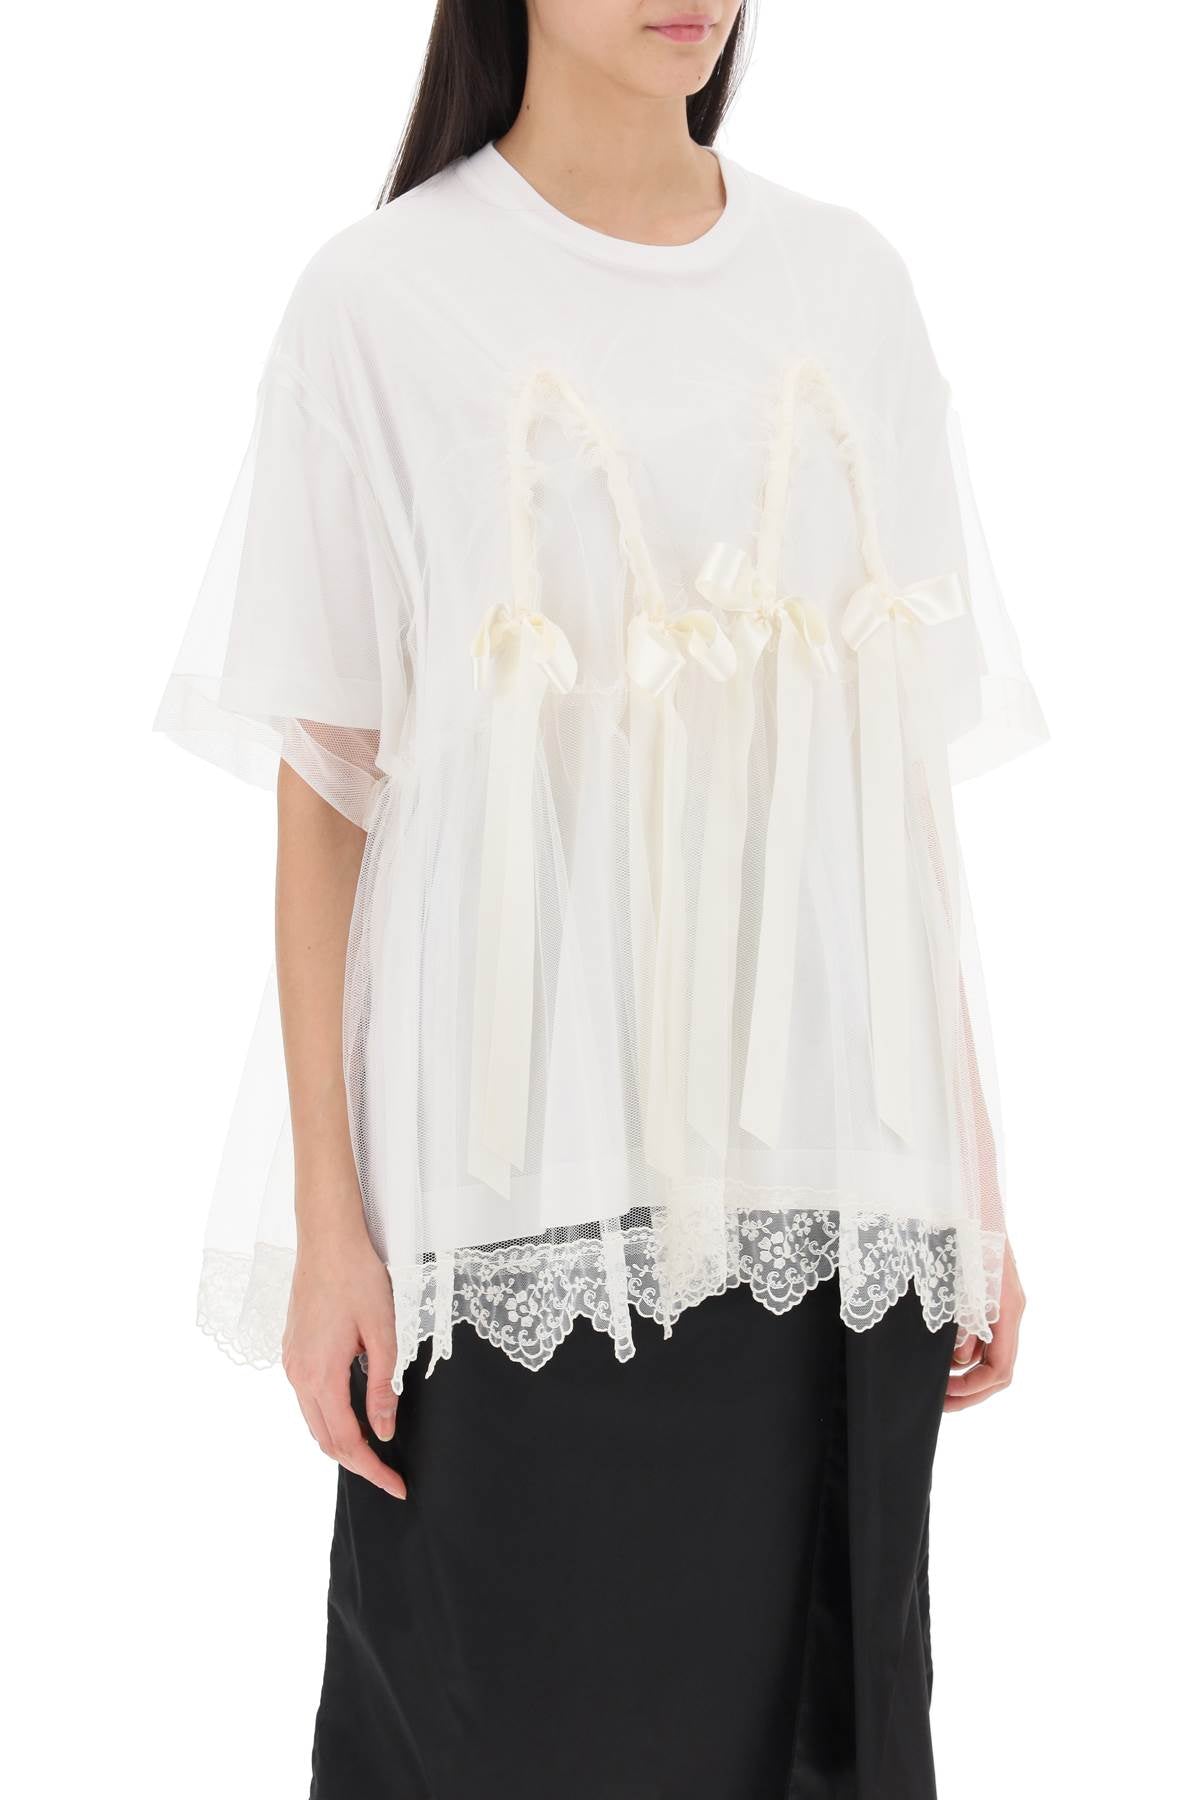 SIMONE ROCHA White Tulle Top with Lace and Bows